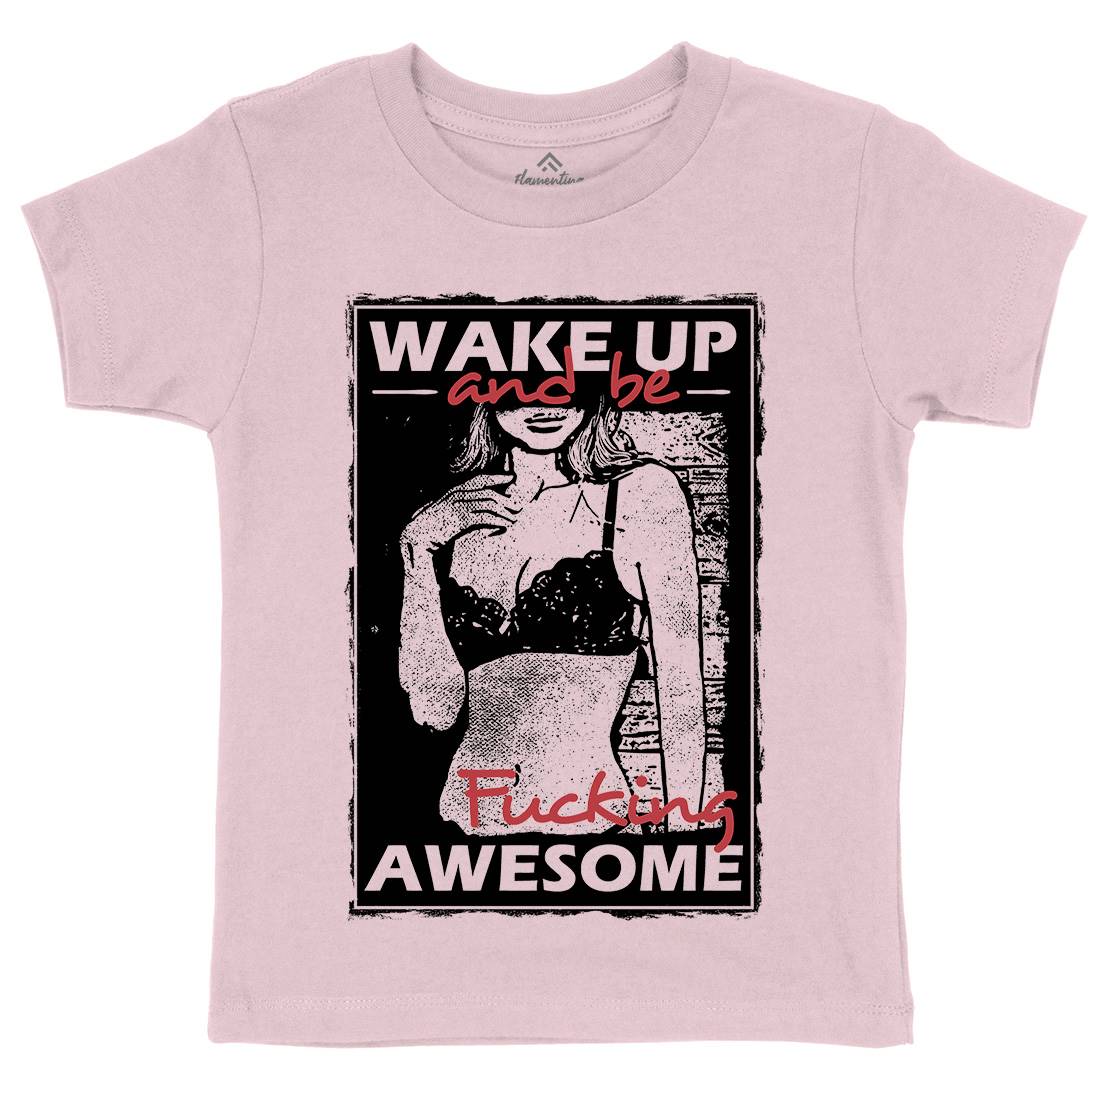 Wake Up And Be Awesome Kids Organic Crew Neck T-Shirt Gym C993